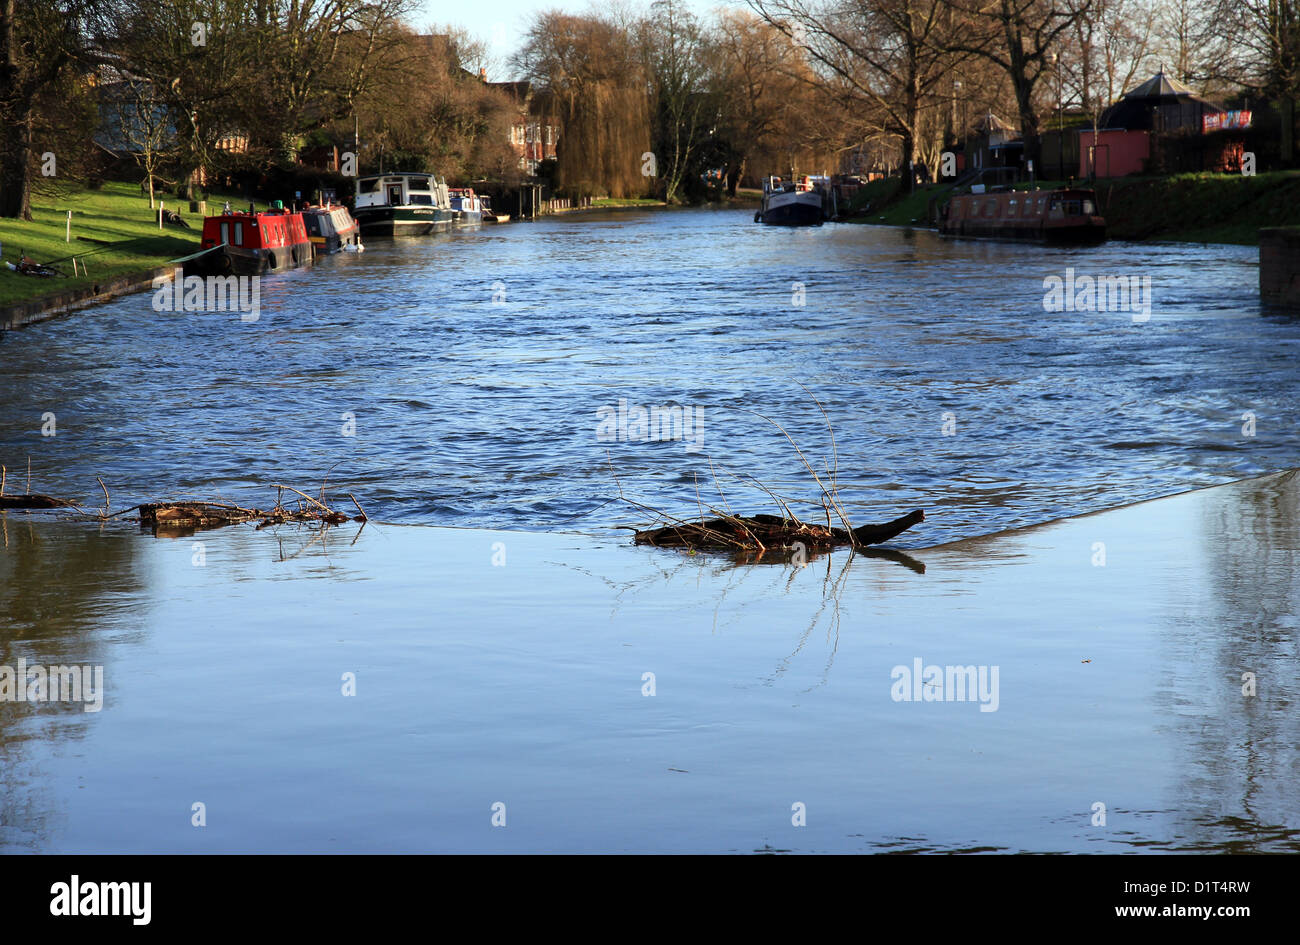 River Cam in spate at Jesus Green, Cambridge, England, UK. High discharge and water levels pouring over weir adjacent to locks. Stock Photo